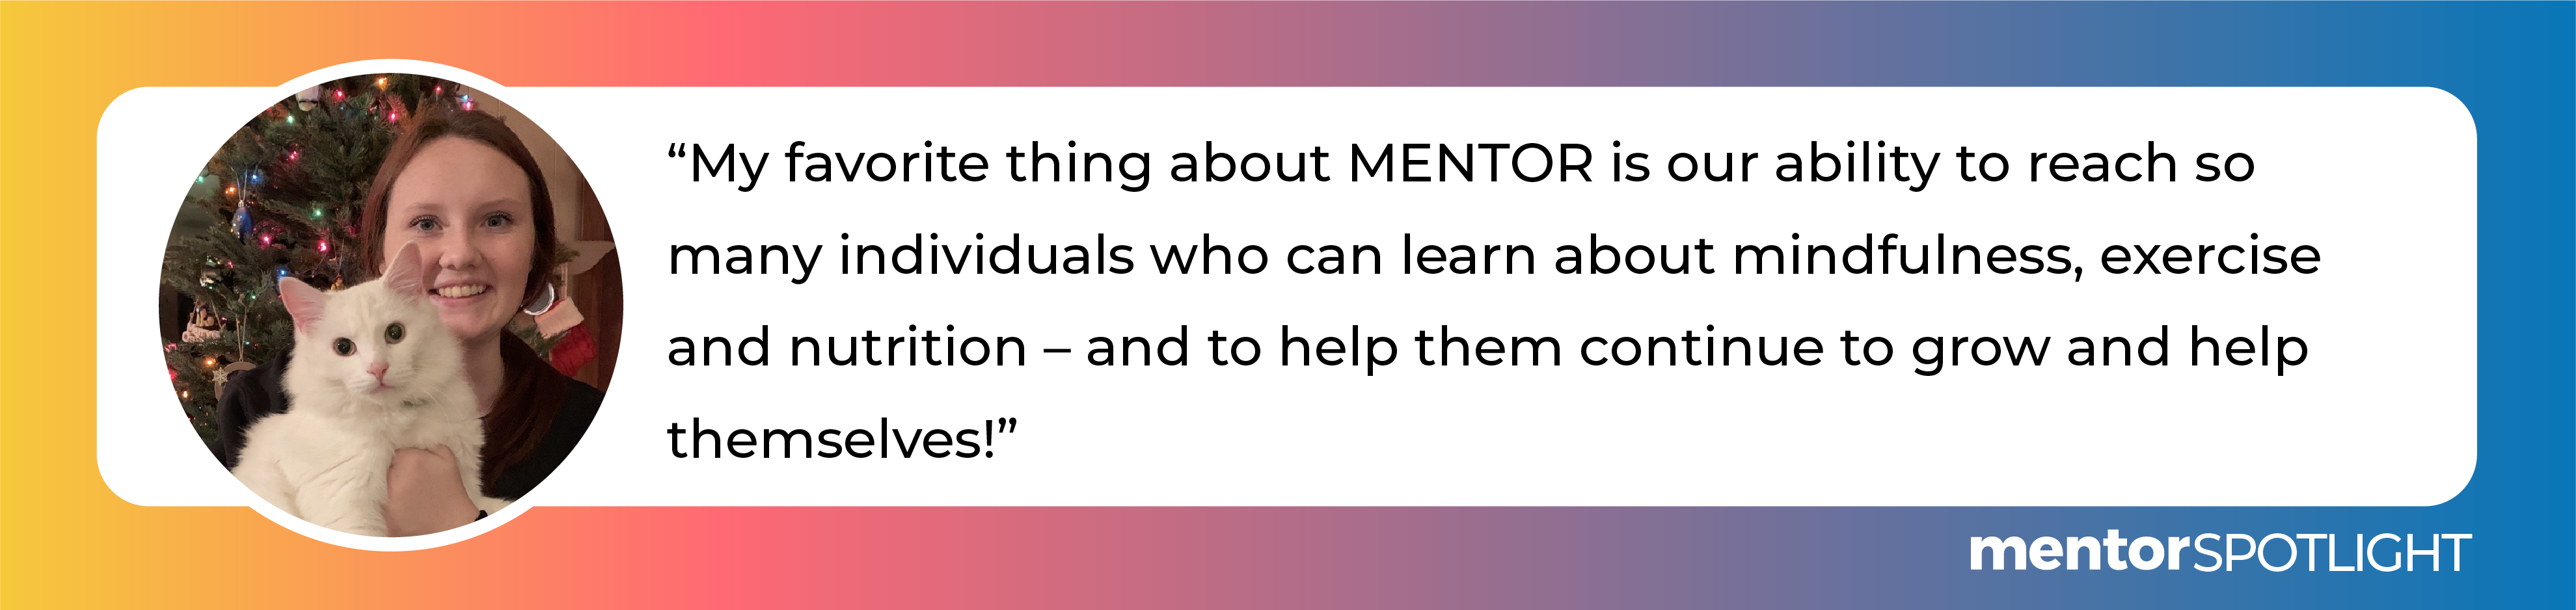 My favorite thing about MENTOR is our ability to reach so many individuals who can learn about mindfulness, exercise and nutrition – and to help them continue to grow and help themselves!